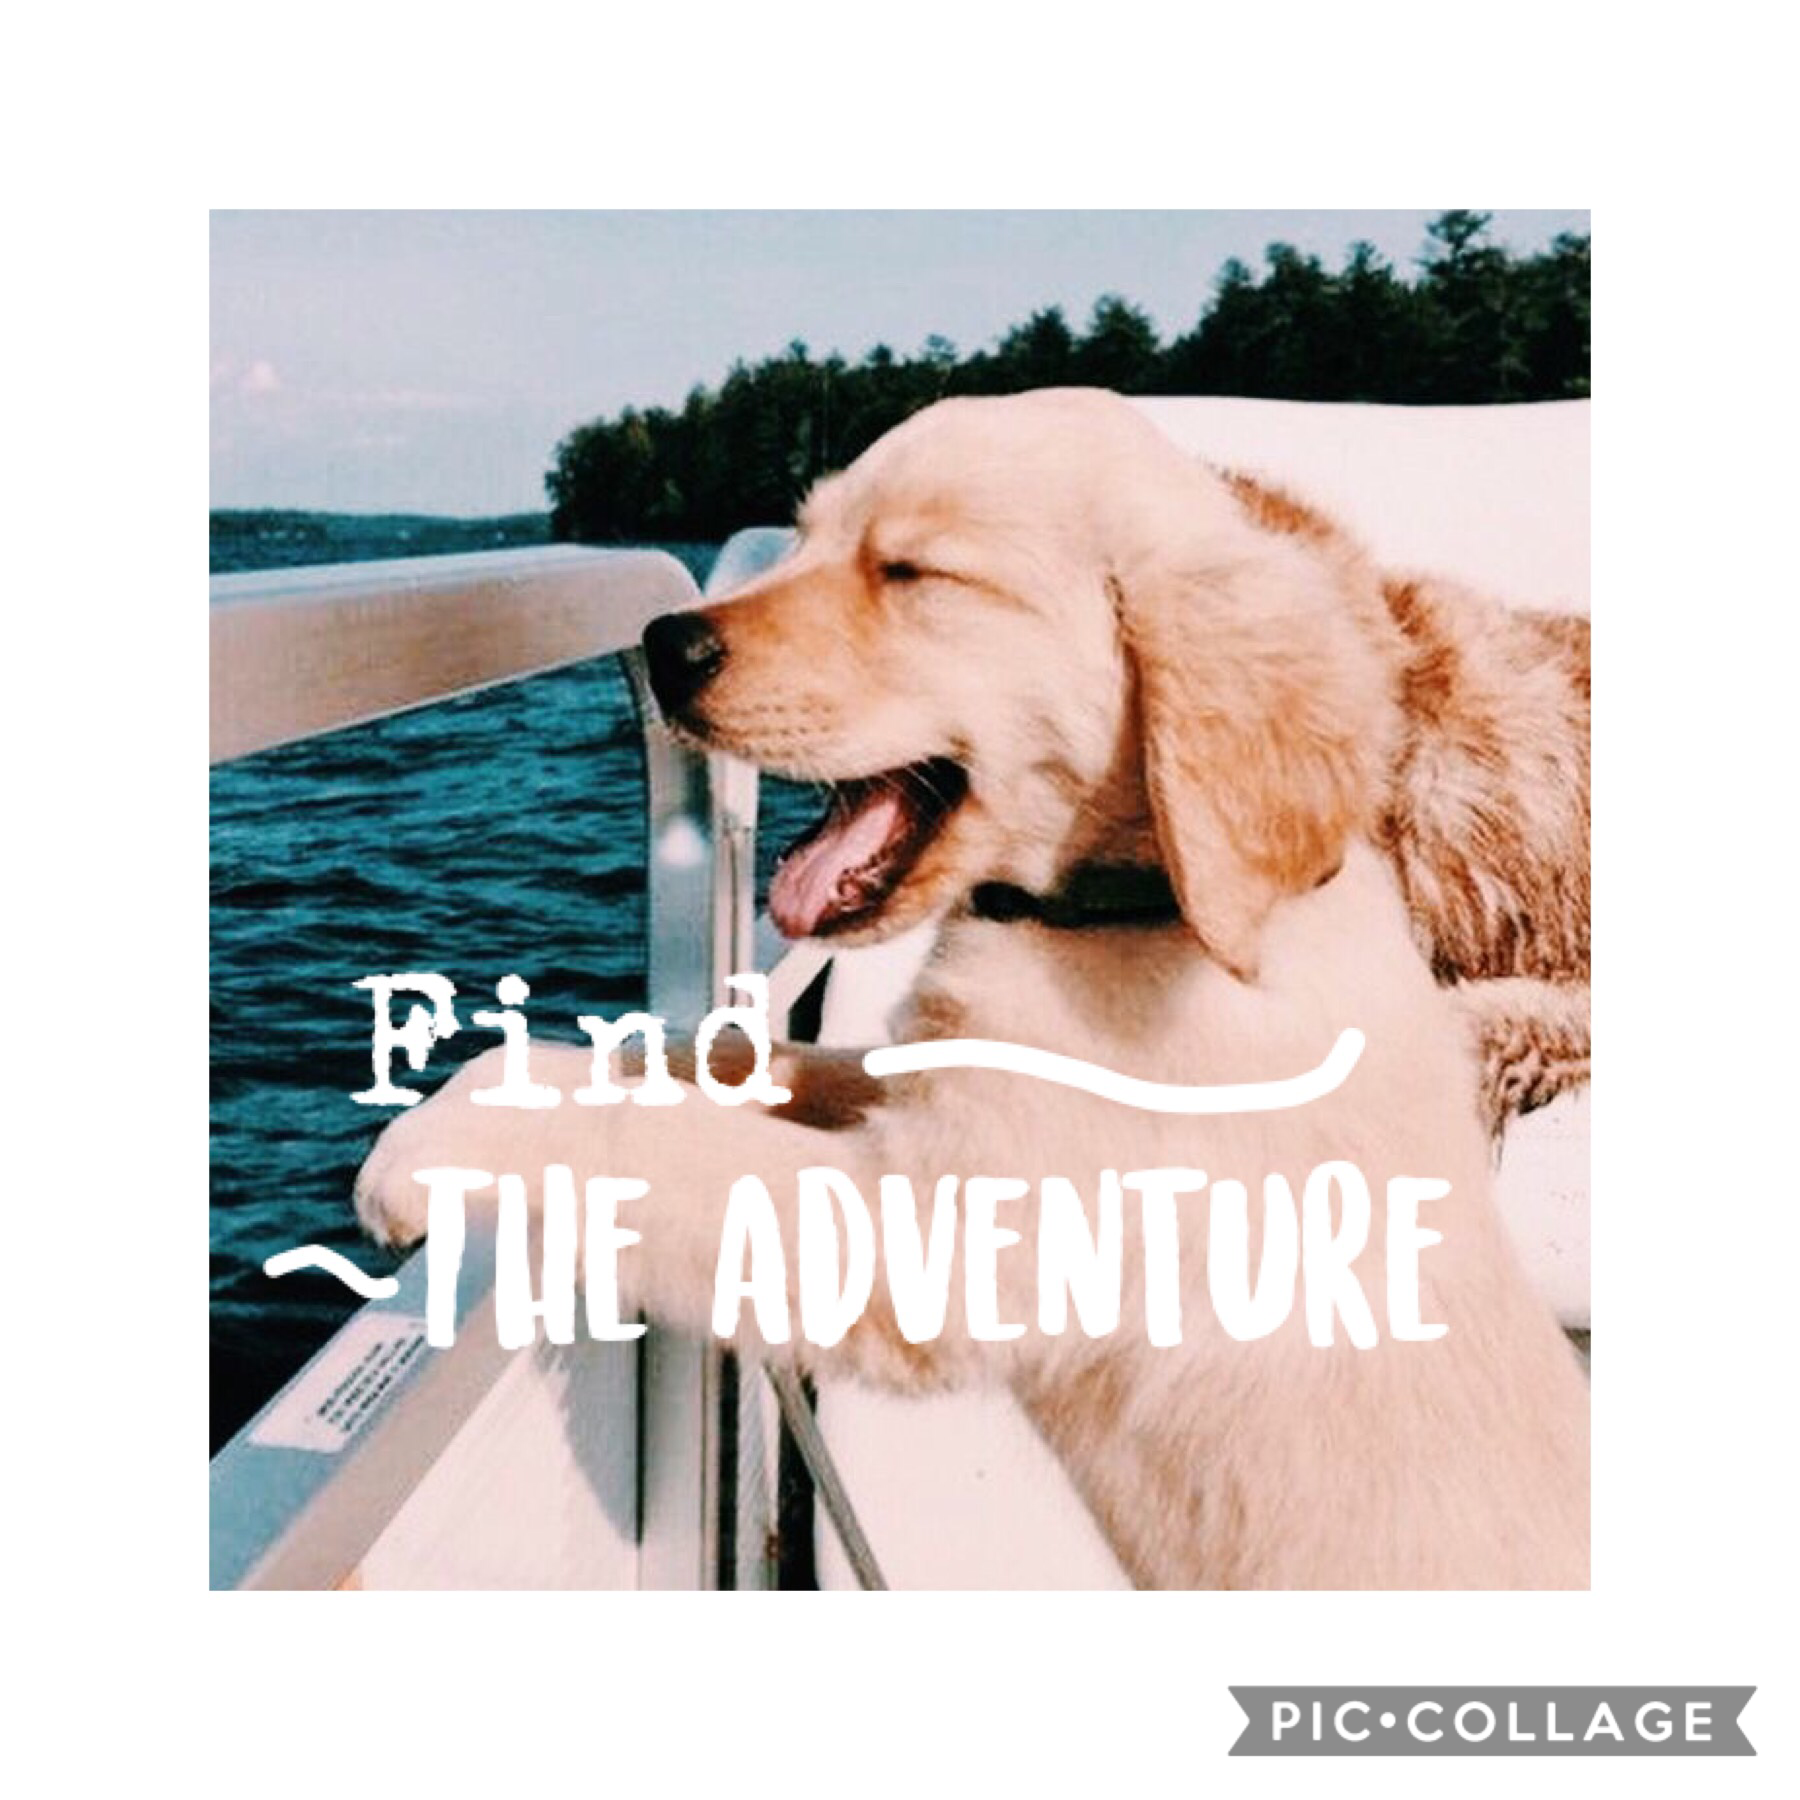 Tap🐶
I just left recolor. I'll be on here though❤️
#FindTheAdventure